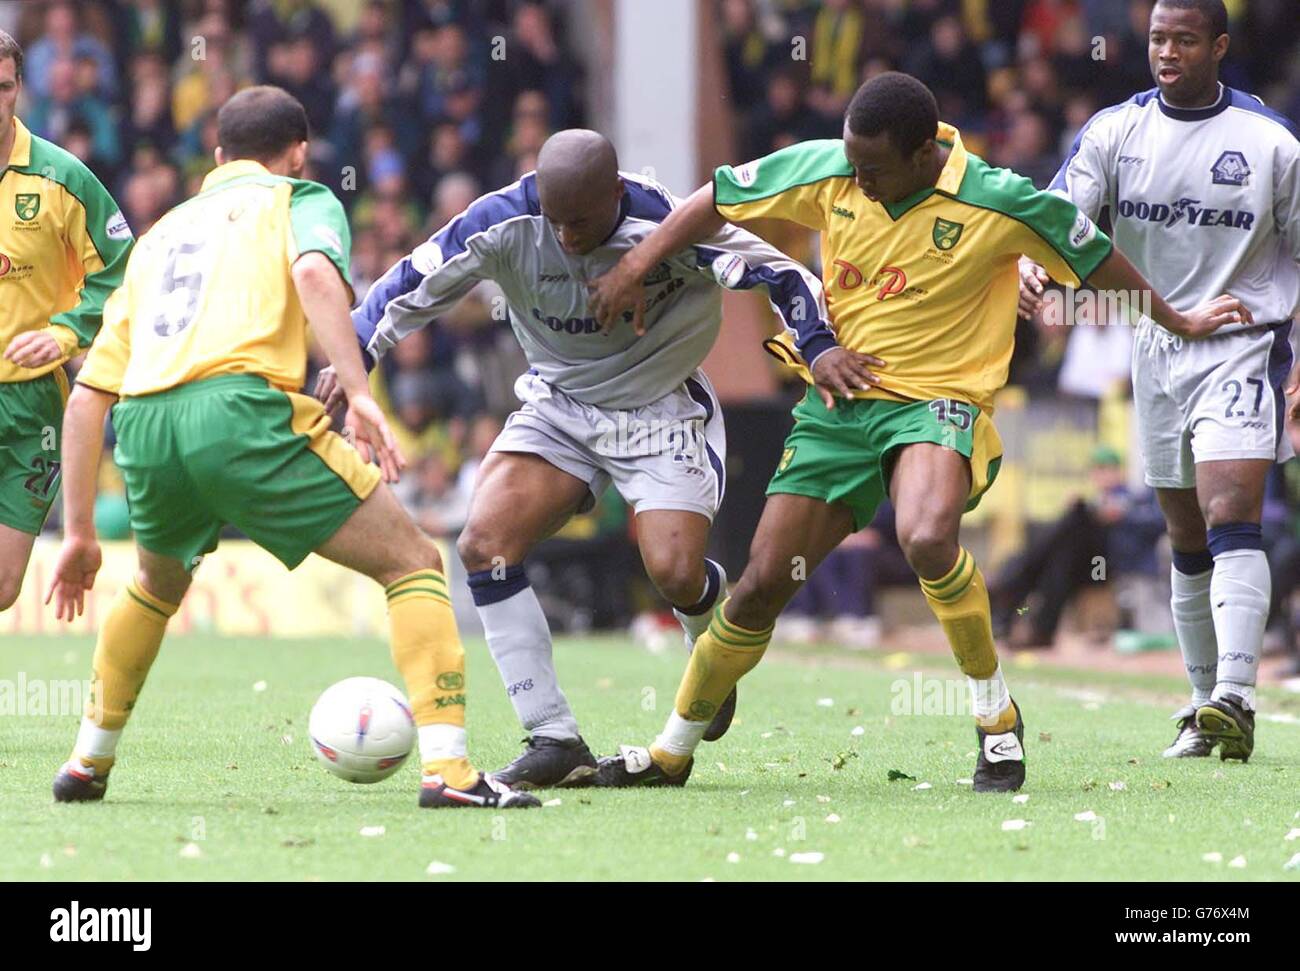 Dean Sturridge of Wolves (centre) tries to find away through the Norwich defence during Norwich's 3-1 win in the Nationwide Division One play off First leg at Carrow Road, Norwich. NO UNOFFICIAL CLUB WEBSITE USE. Stock Photo